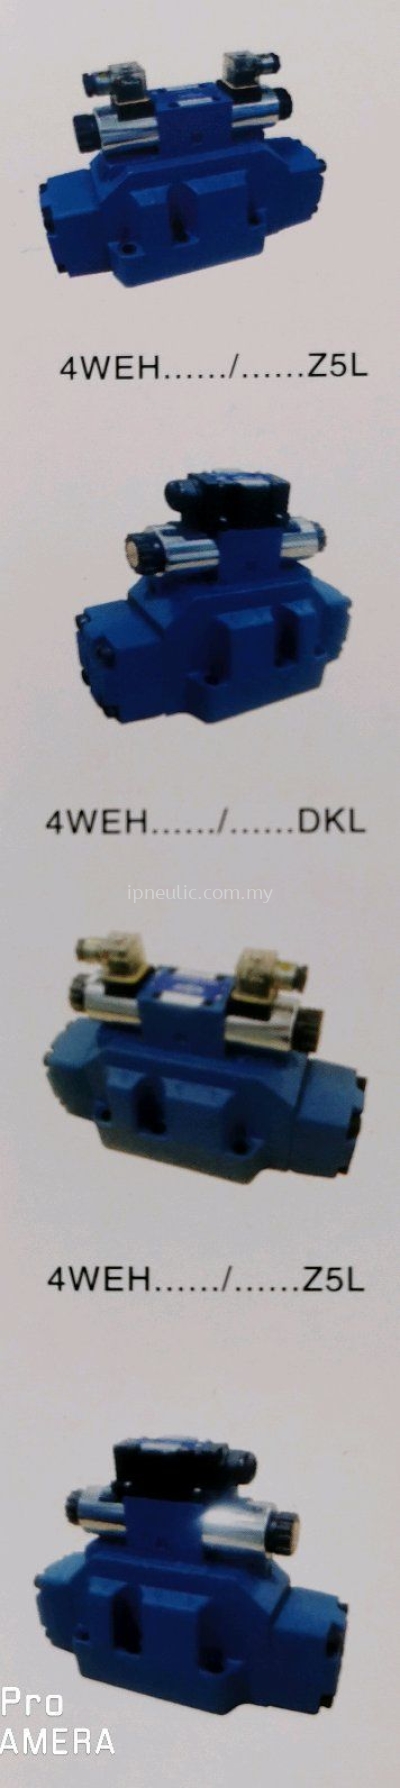 D-4 4WEH ELECTRIC CONTROL HYDRAULIC OPERATED DIRECTIONAL CONTROL VALVES